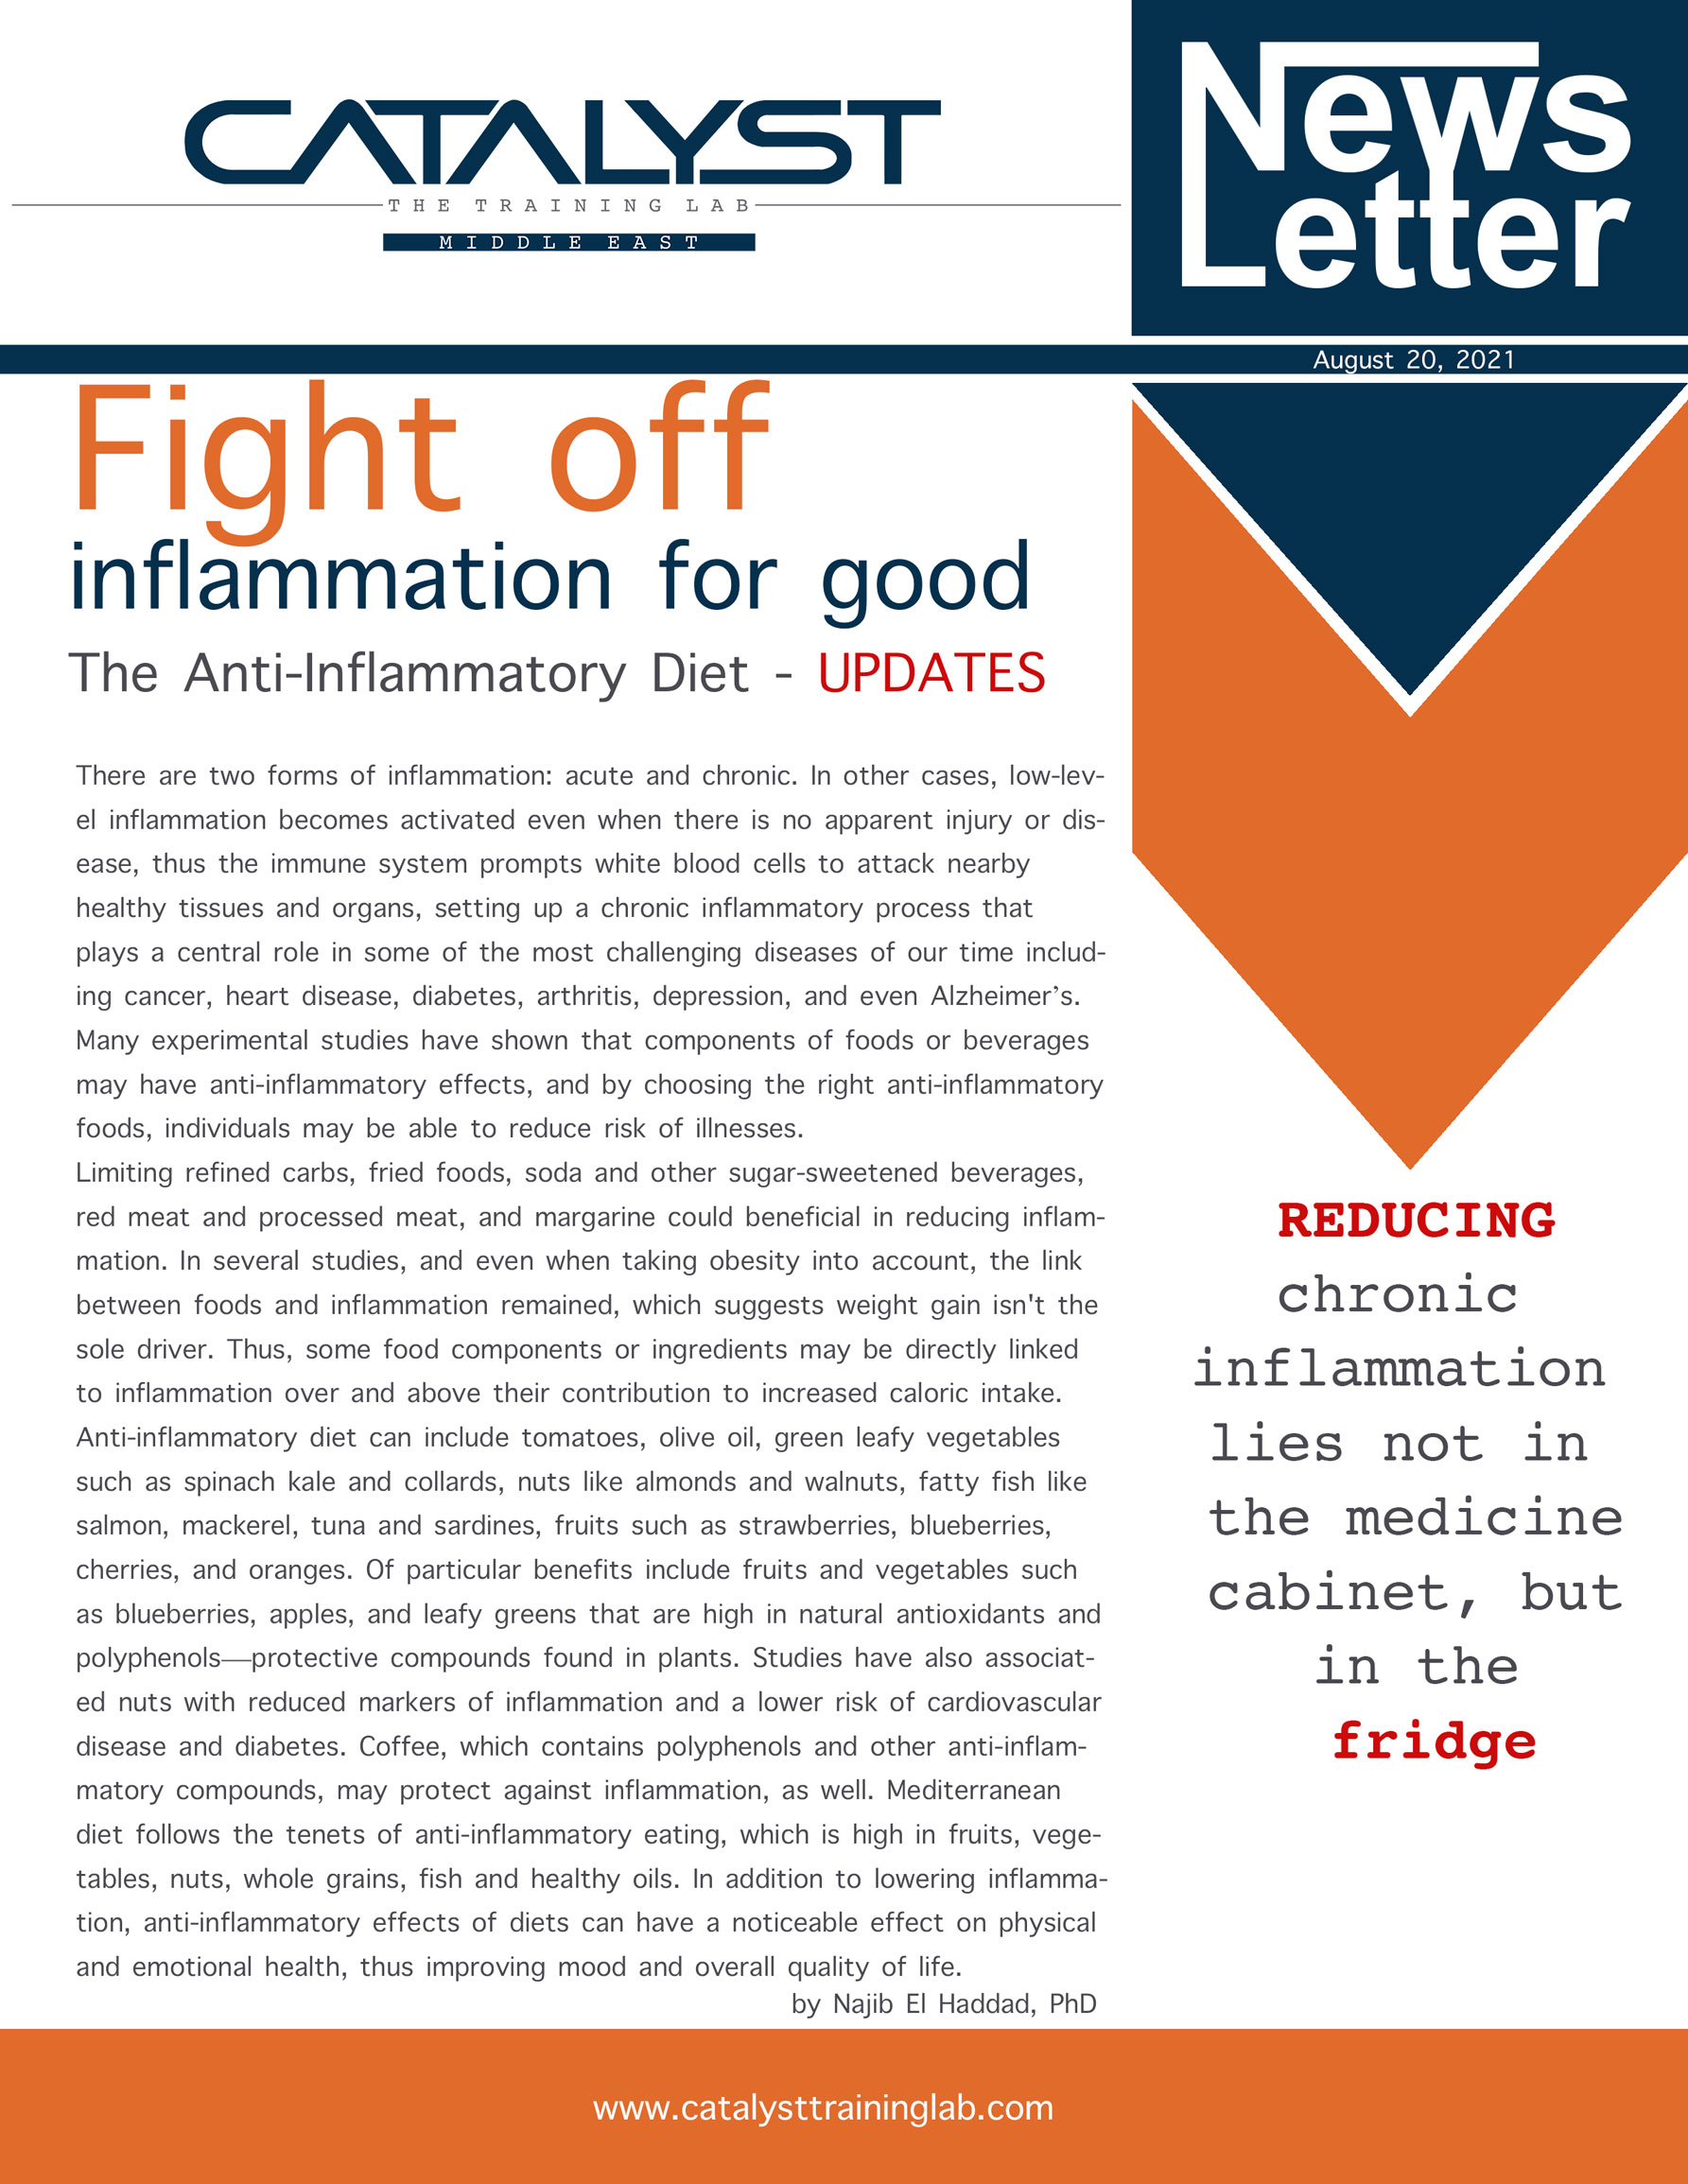 Fight Off inflammation for good 